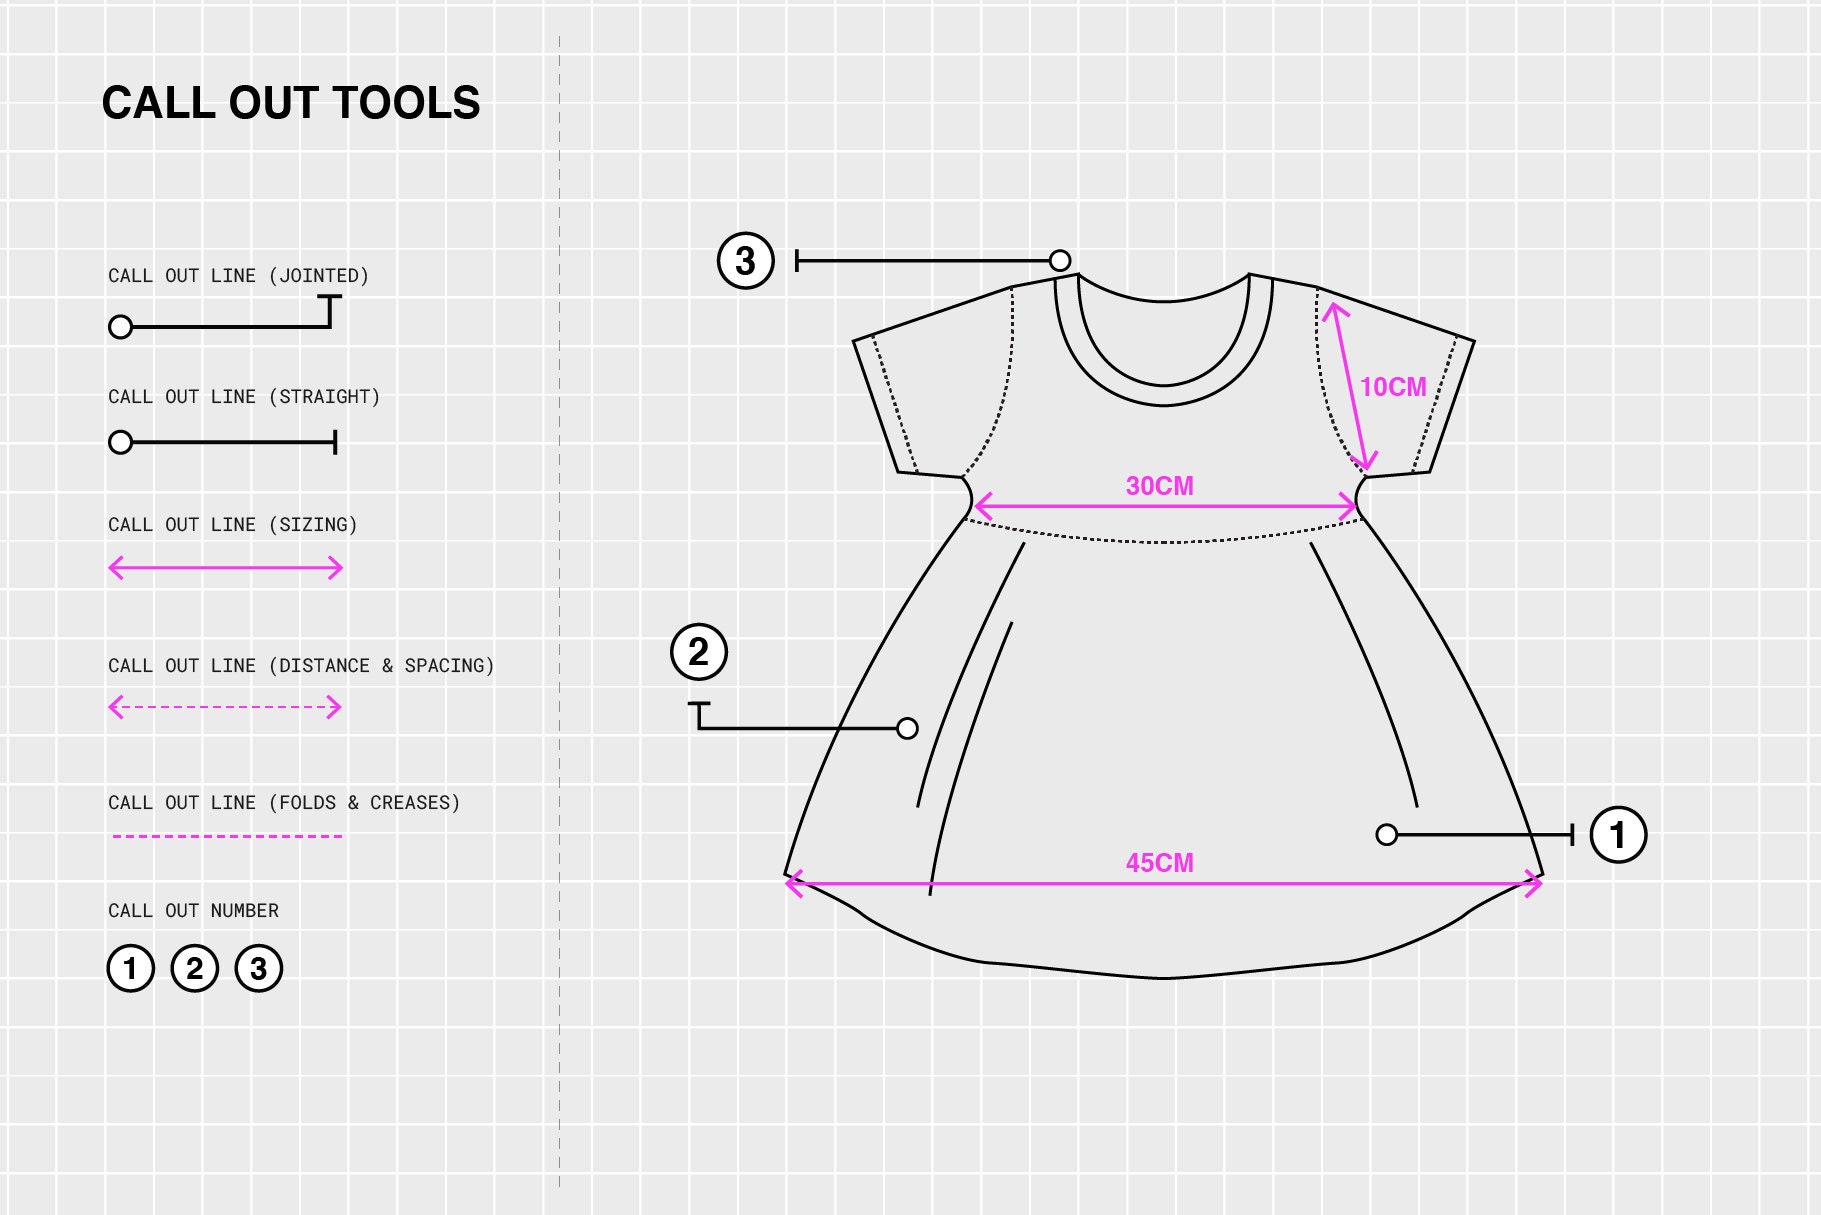 Fashion design children and babies clothing collection with tech packs by  Nataliayalman